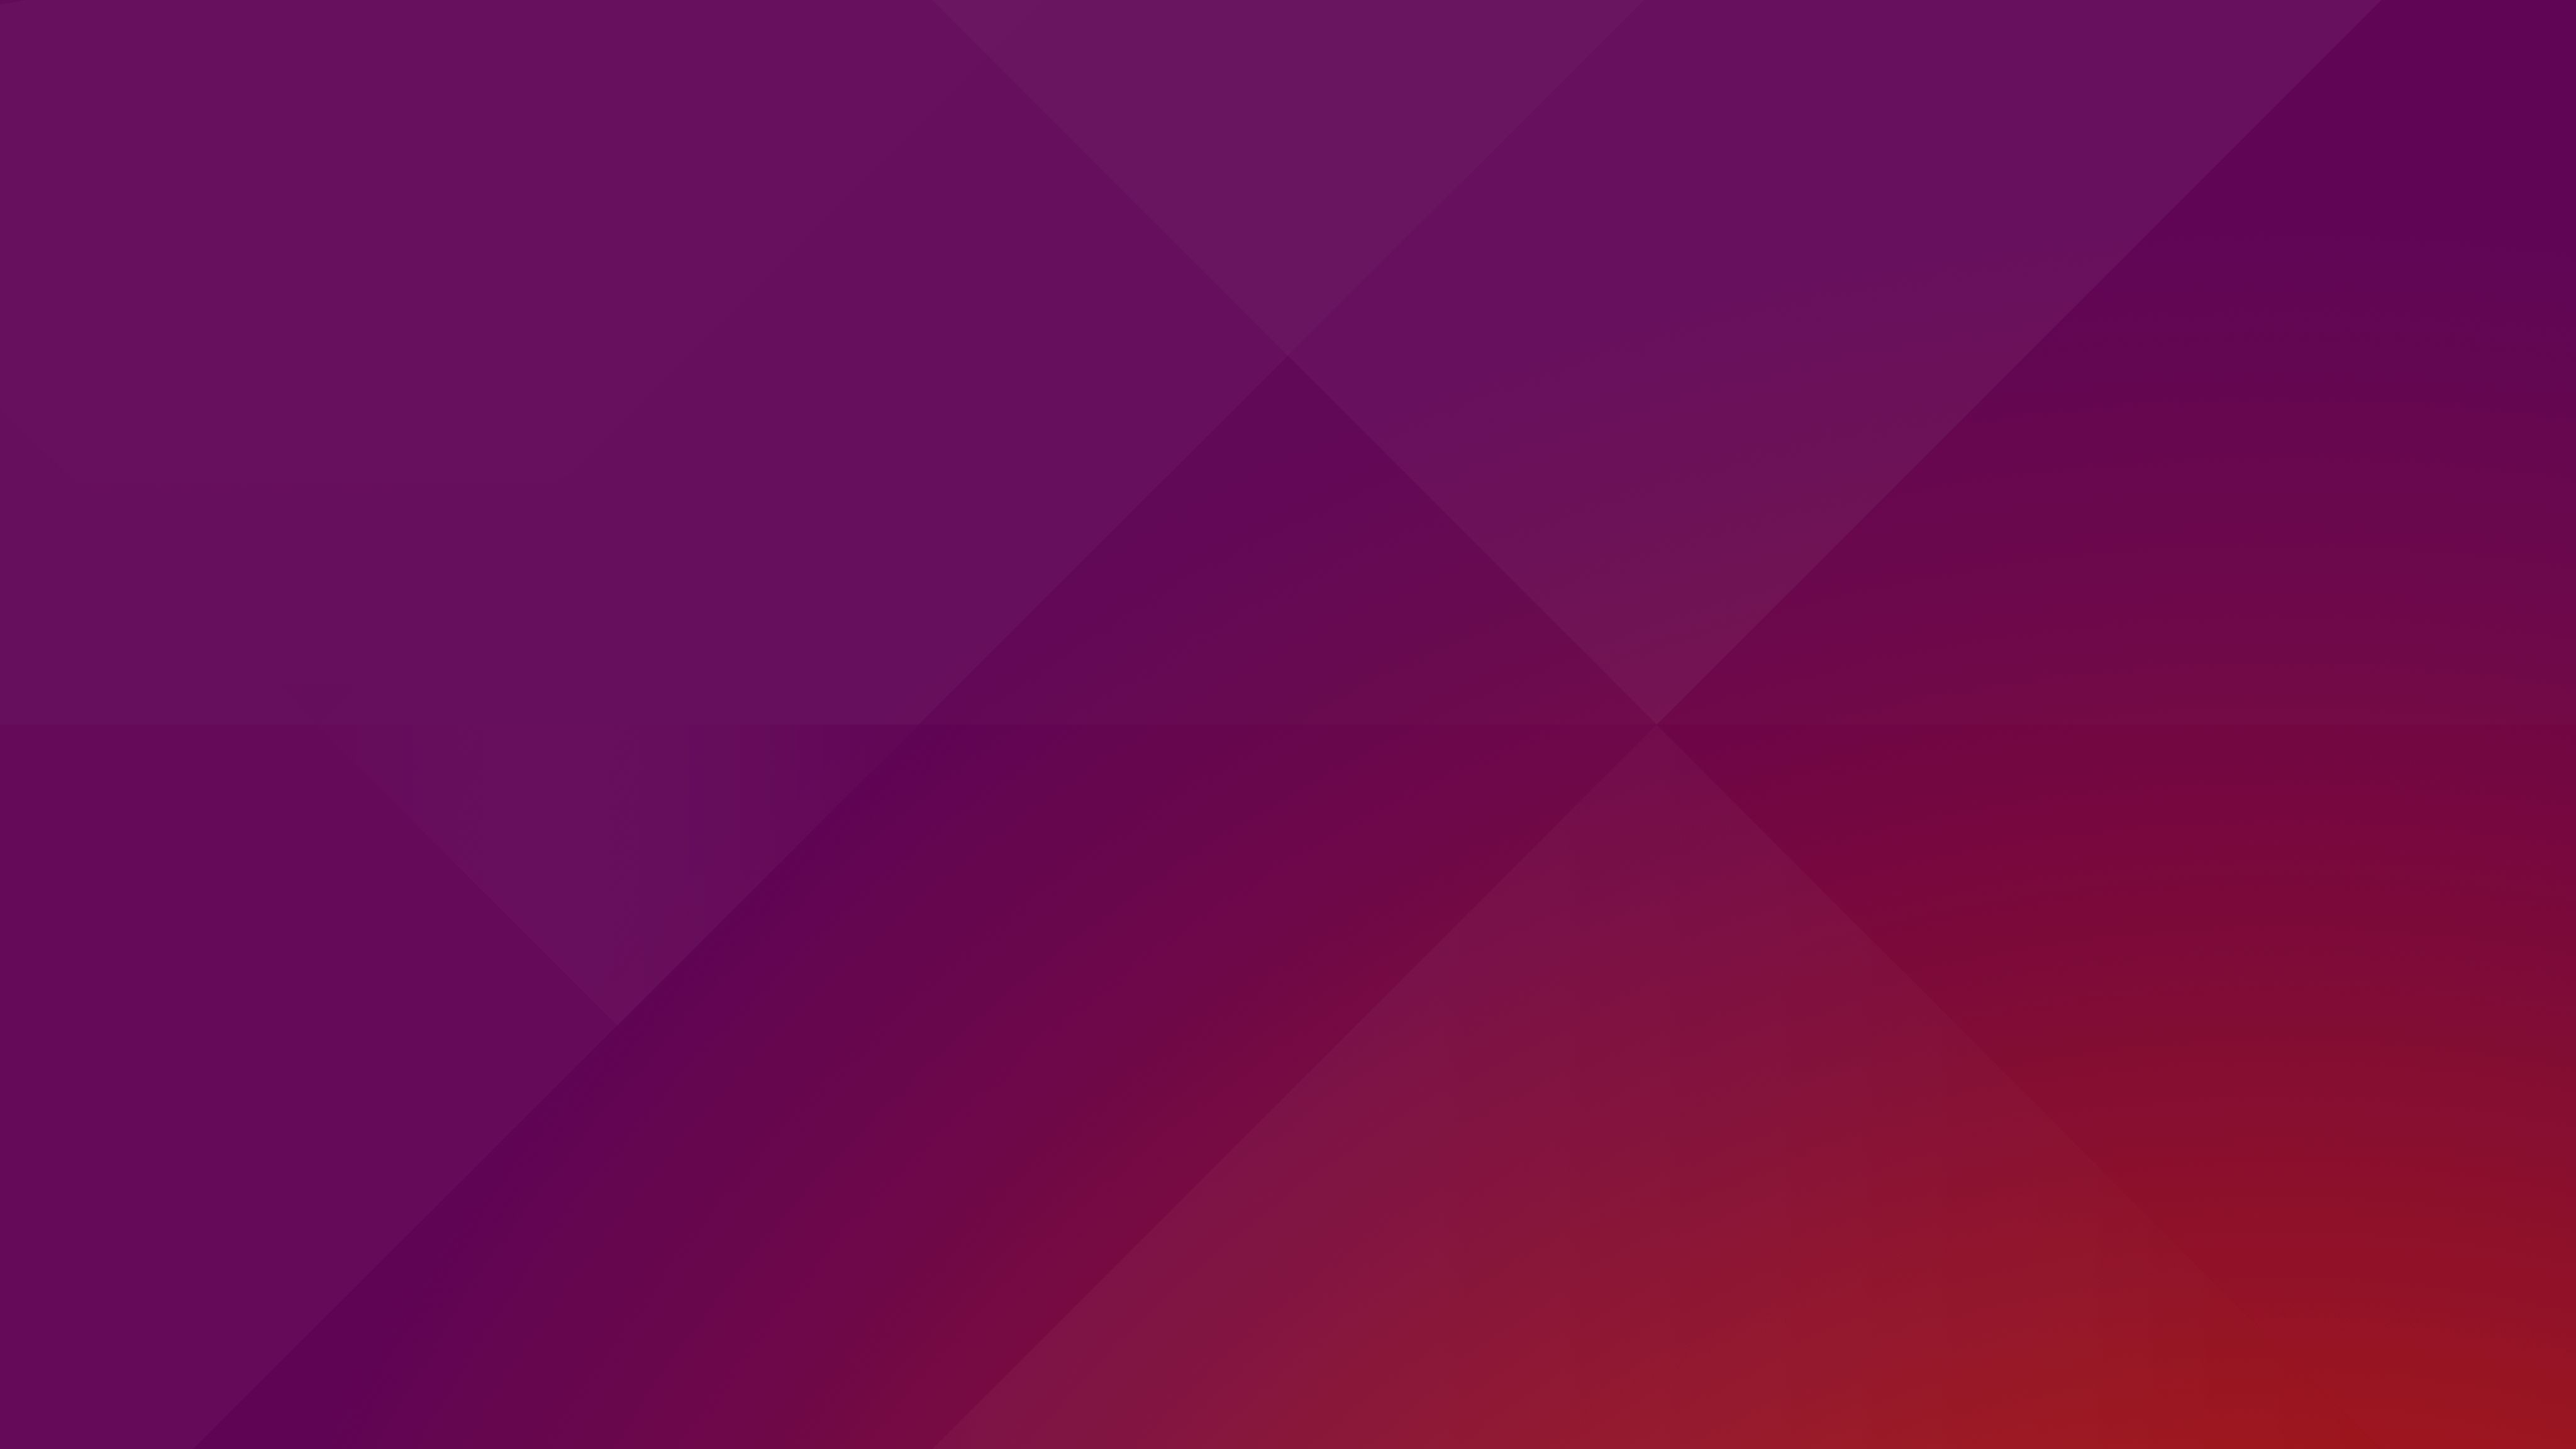 Wallpaper, illustration, heart, red, purple, text, simple, triangle, pattern, Linux, circle, Ubuntu, pink, magenta, operating systems, Wily Wolf, color, shape, design, line, petal, computer wallpaper, font 4096x2304 Wallpaper